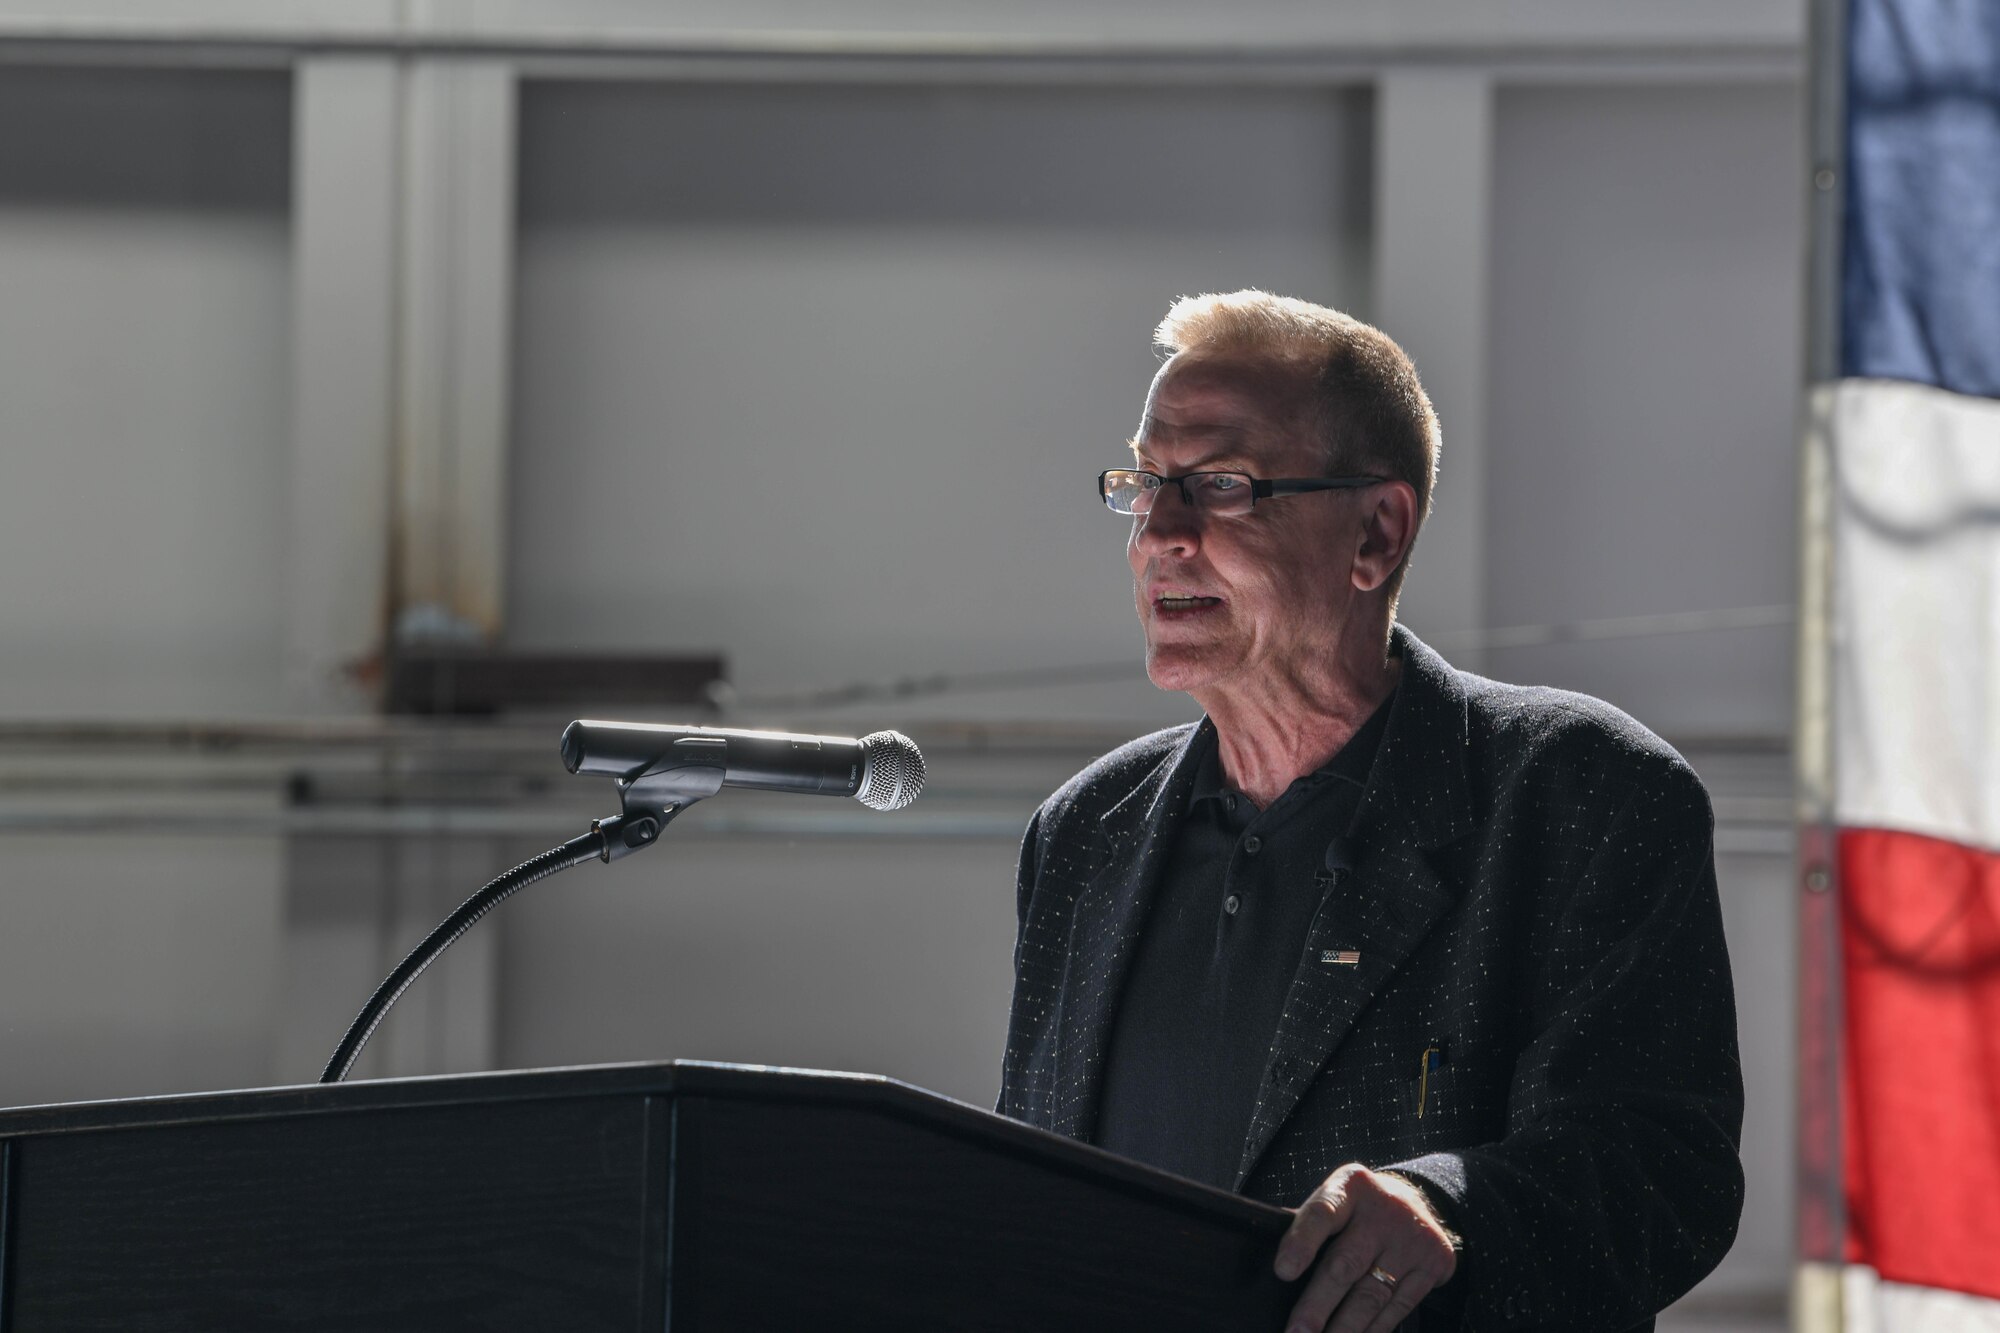 Craig Nelson, an author, talks about the Doolittle Raid and how it changed the war and perhaps the U.S. during an event at Ellsworth Air Force Base, S.D., April 18, 2018. In the midst of Word War II, the Raid forced Japan to realize that the U.S. was able to reach them with bombers and threaten their homeland. (U.S. Air Force photo by Airman 1st Class Thomas Karol)